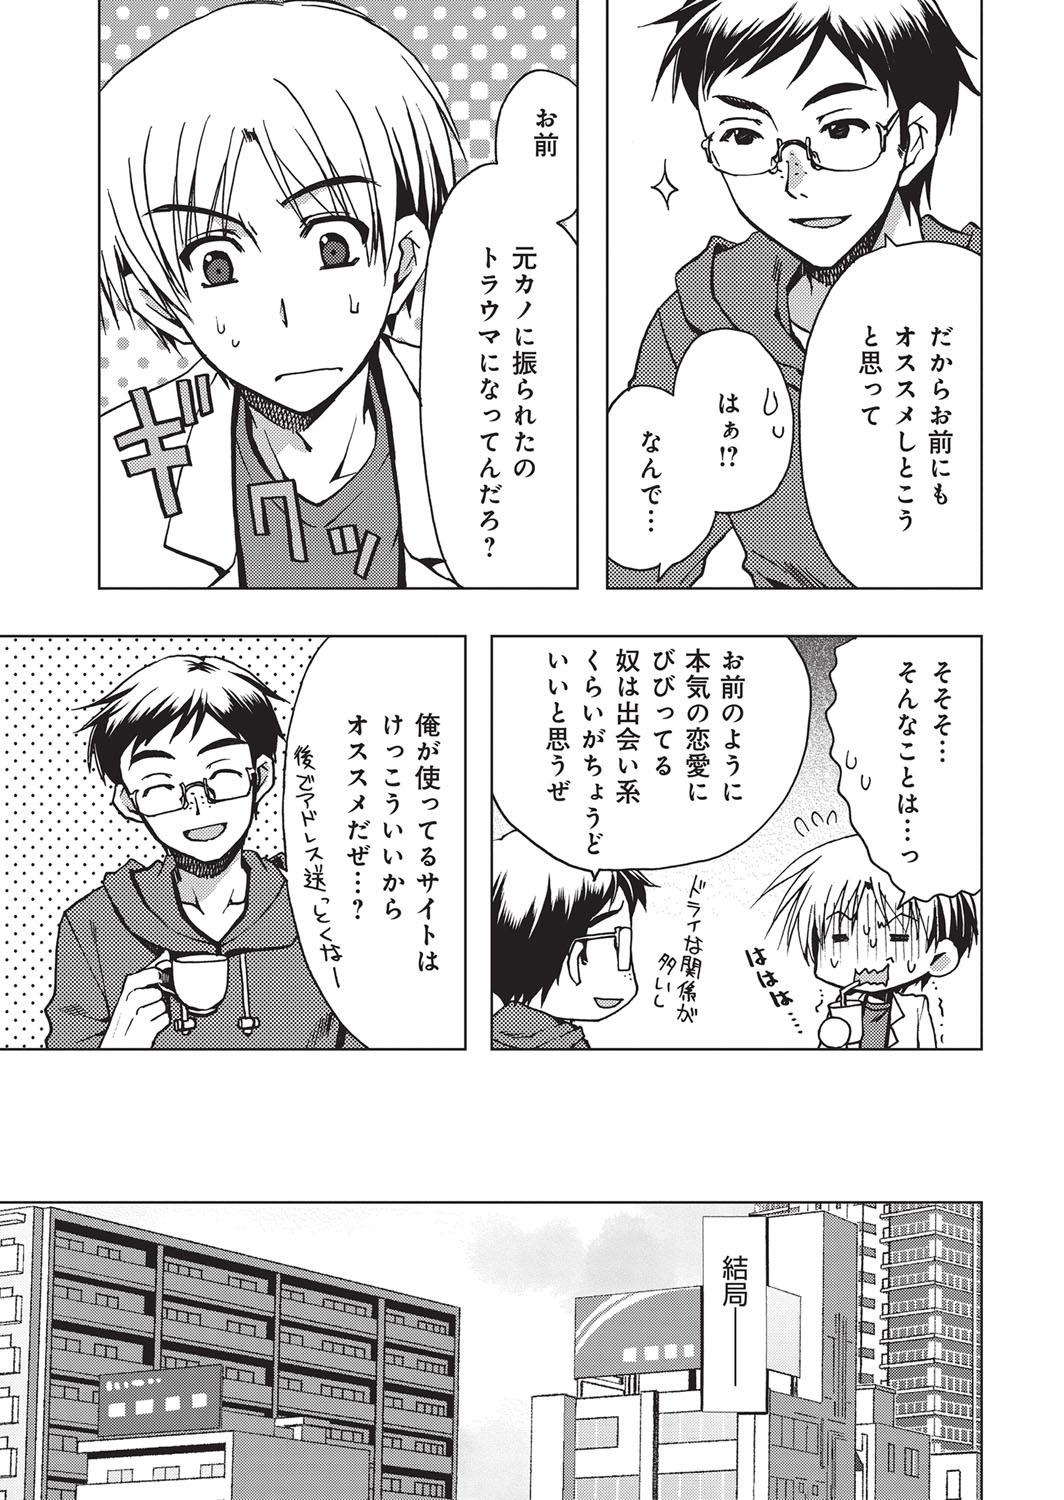 Toys YOUNG Kyun! Vol. 1 Spreading - Page 8